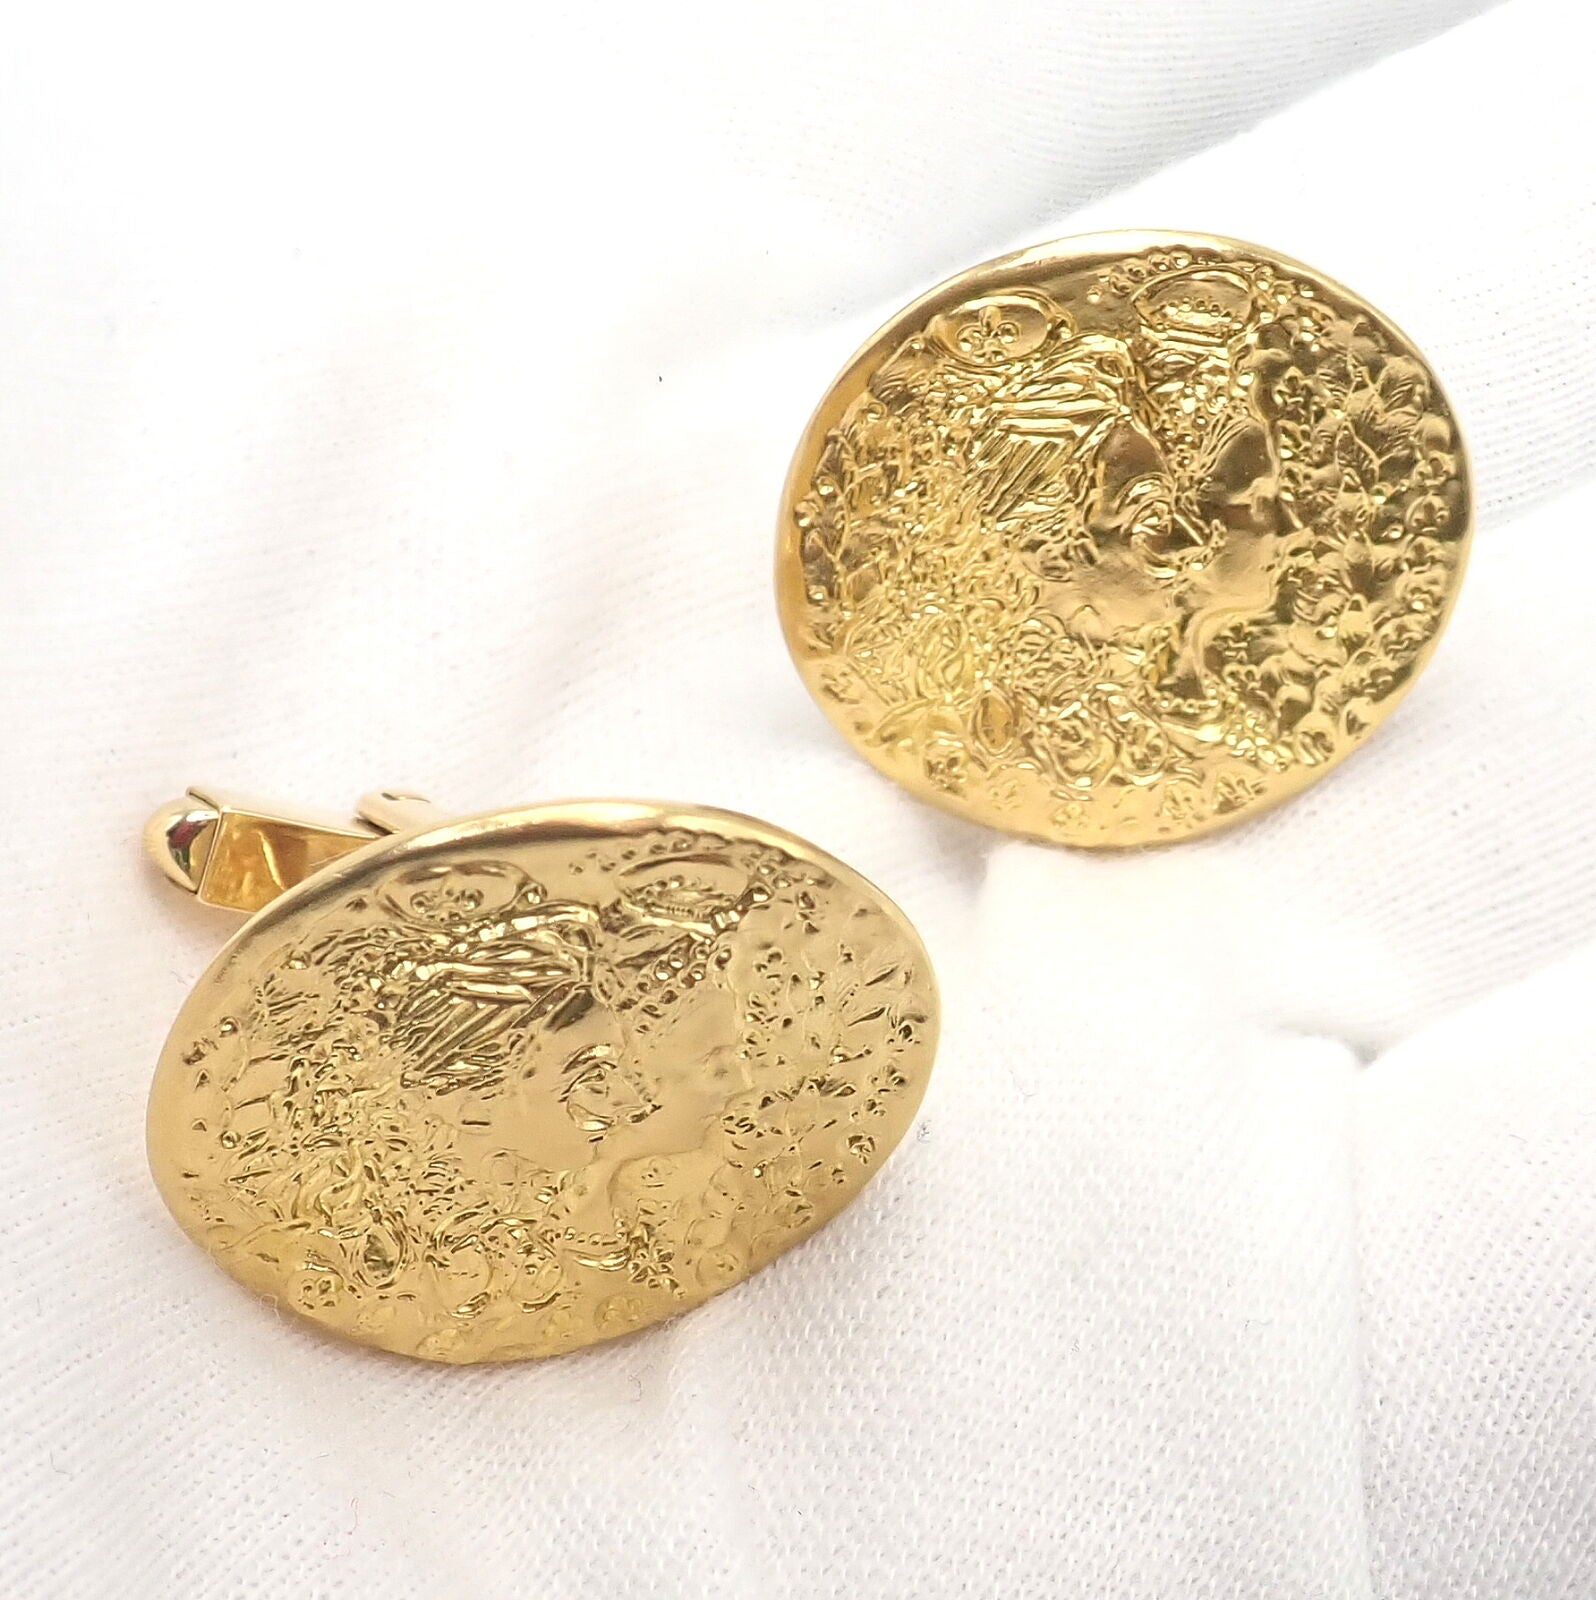 Salvador Dali for Piaget Jewelry & Watches:Men's Jewelry:Cufflinks Authentic Salvador Dali D'or for Piaget 18k & 22k Yellow Gold Cufflinks